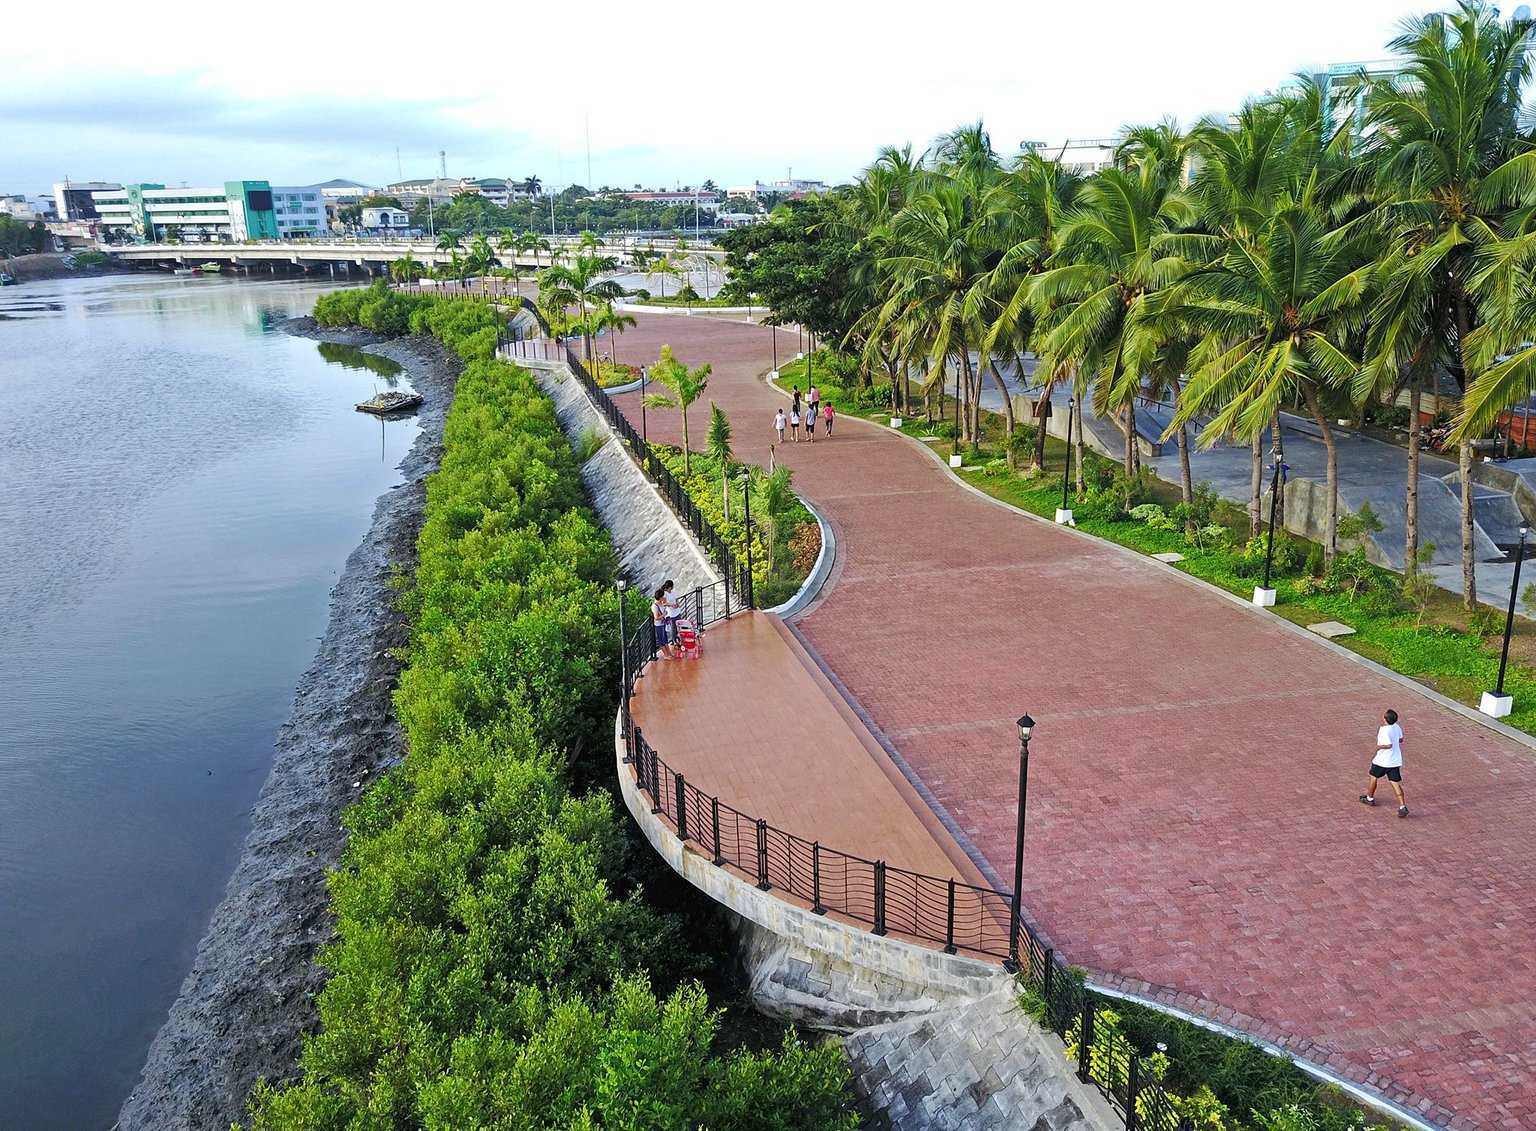 ESPLANADE. Designed by celebrated Filipino architect Paulo Alcazaren, the Esplanade was recently hailed a Haligi ng Dangal awardee for best landscape architecture by the National Commission for Culture and the Arts. Photo courtesy of Paulo Alcazaren  